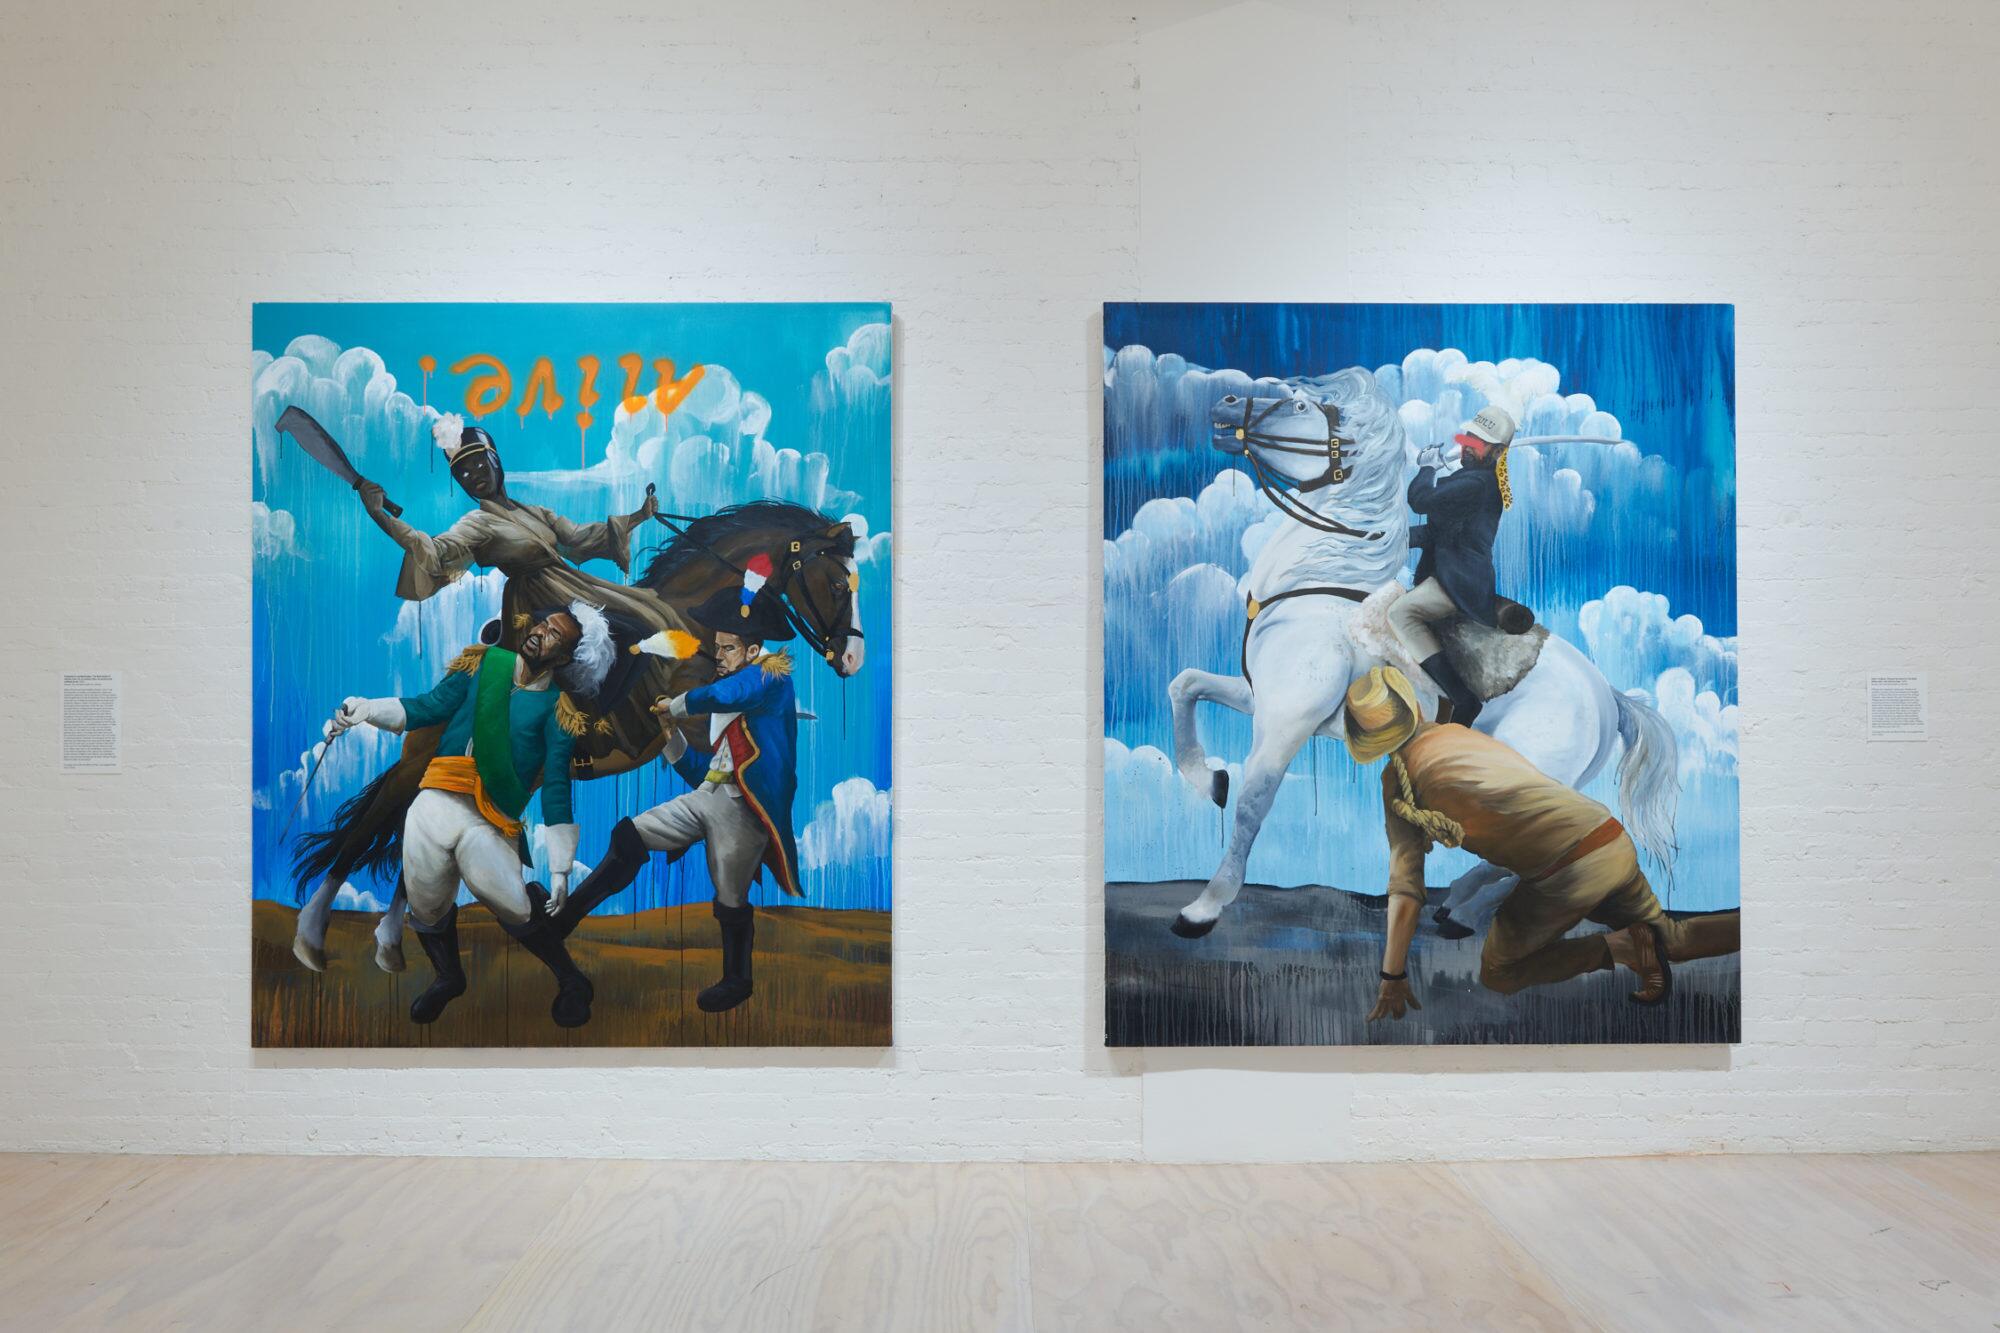 Two modern paintings inspired by equestrian paintings styles showing soldiers on horseback about to slay enemies